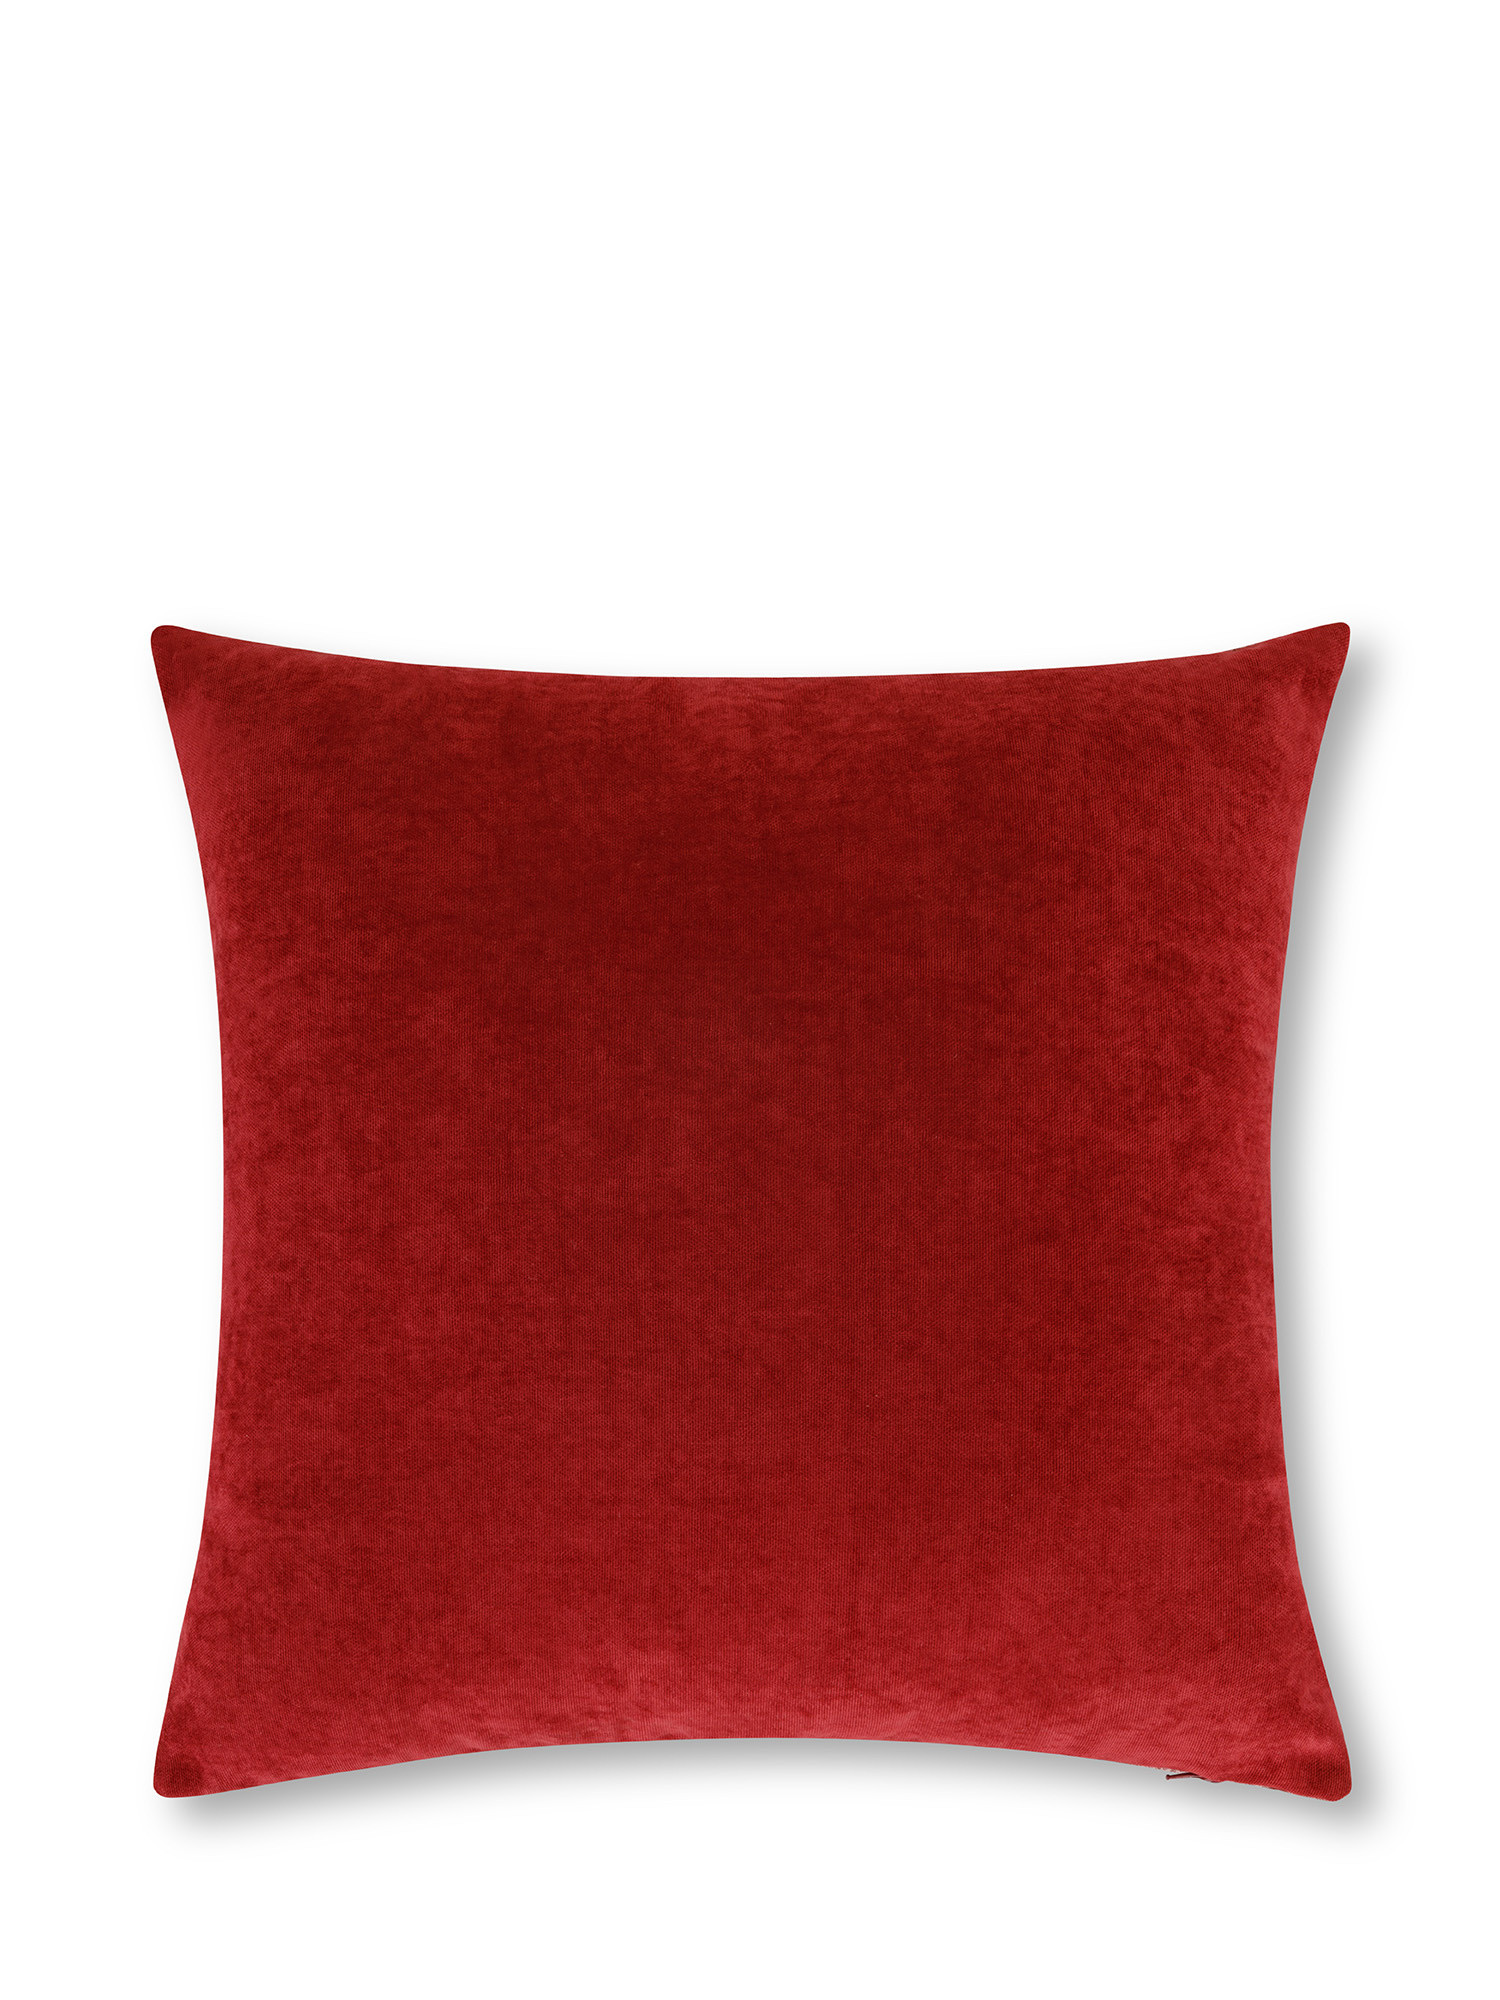 Cushion in plain color damask jacquard fabric 45x45 cm, Red, large image number 1